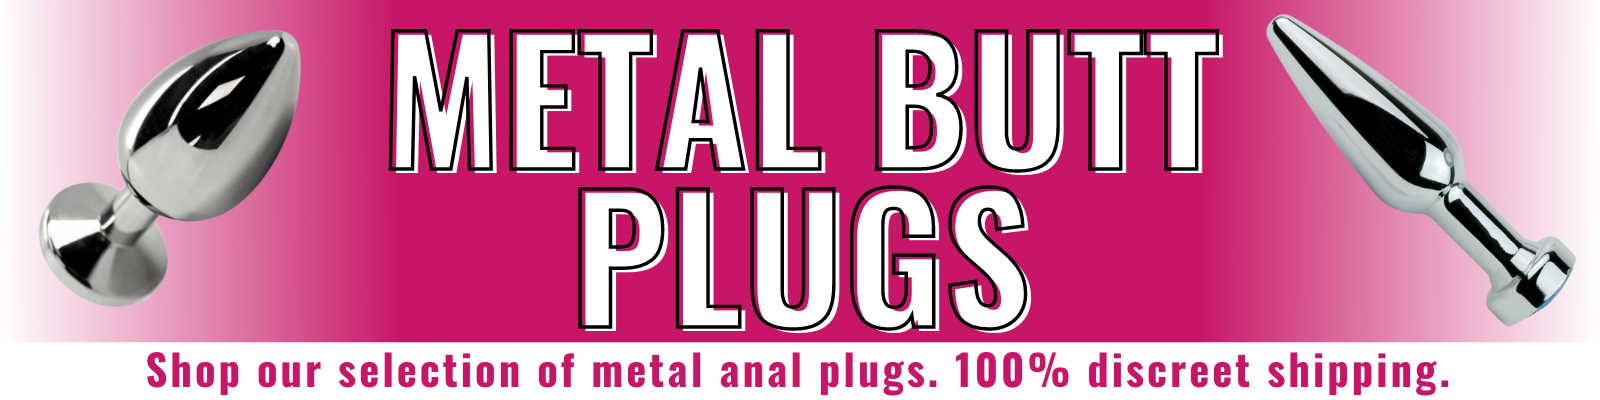 Banner for our metal butt plugs collection. Banner reads: Metal butt plugs. Shop our selection of metal anal plugs. 100% discreet shipping. 